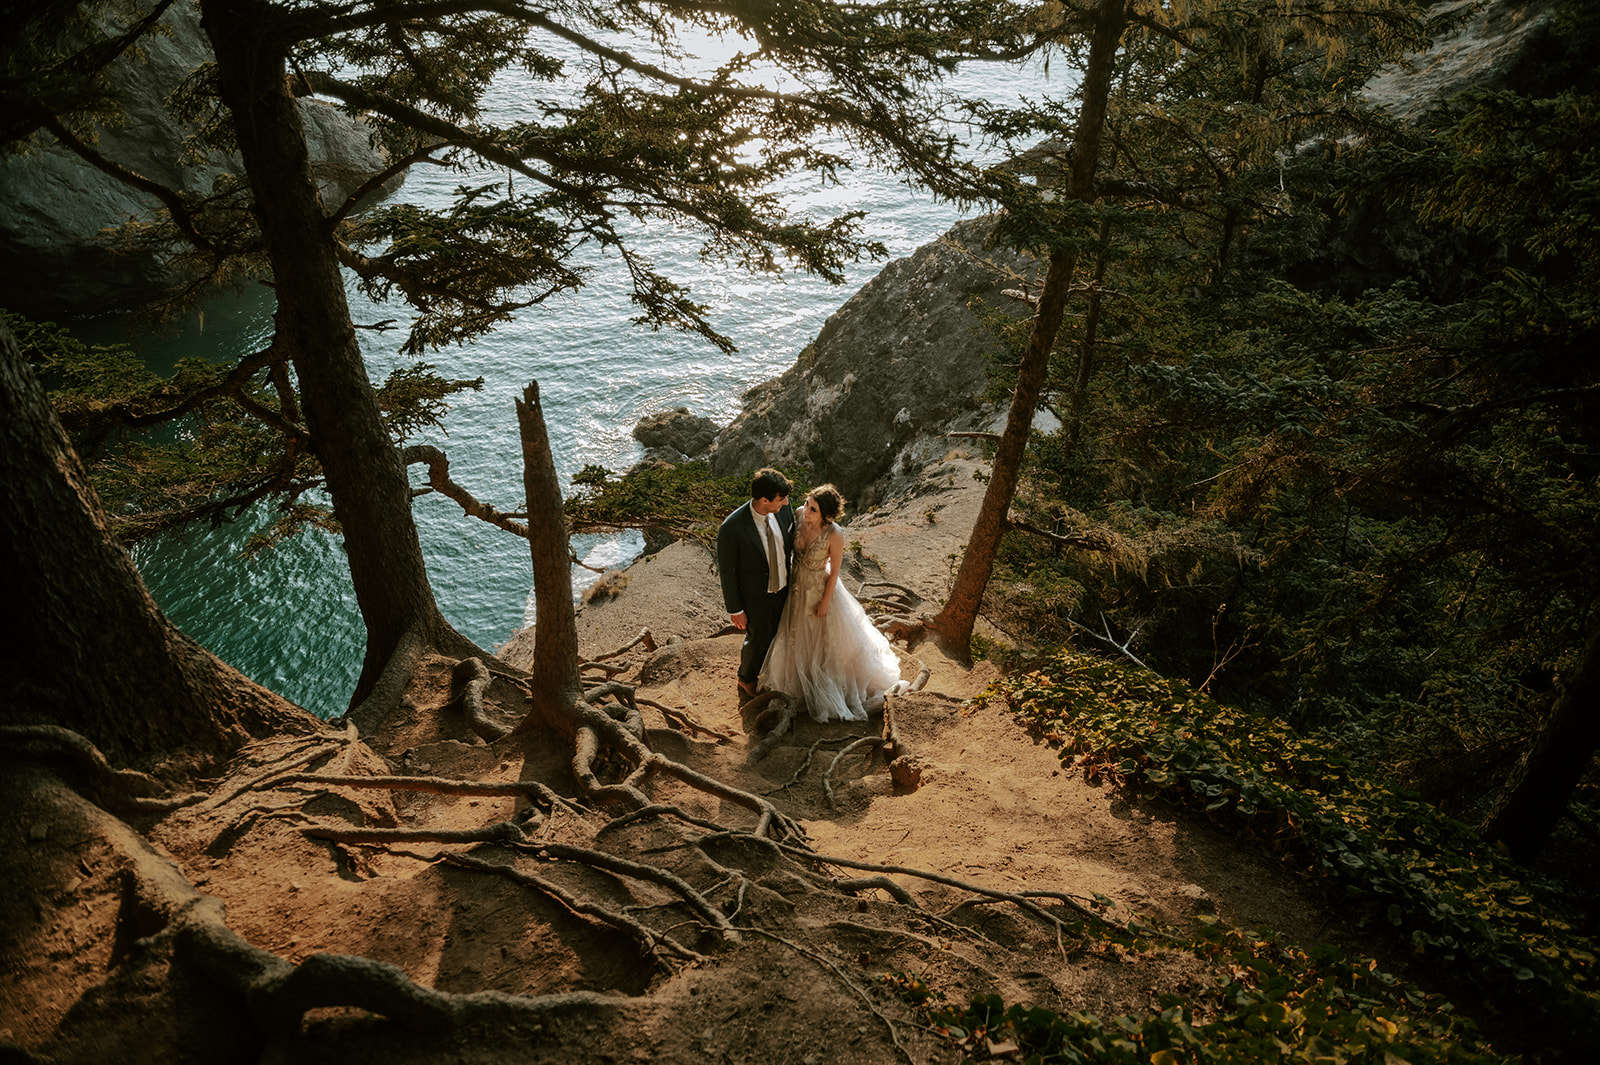 Bride and groom hiking for an adventure elopement on the Oregon coast At Samuel h boardman